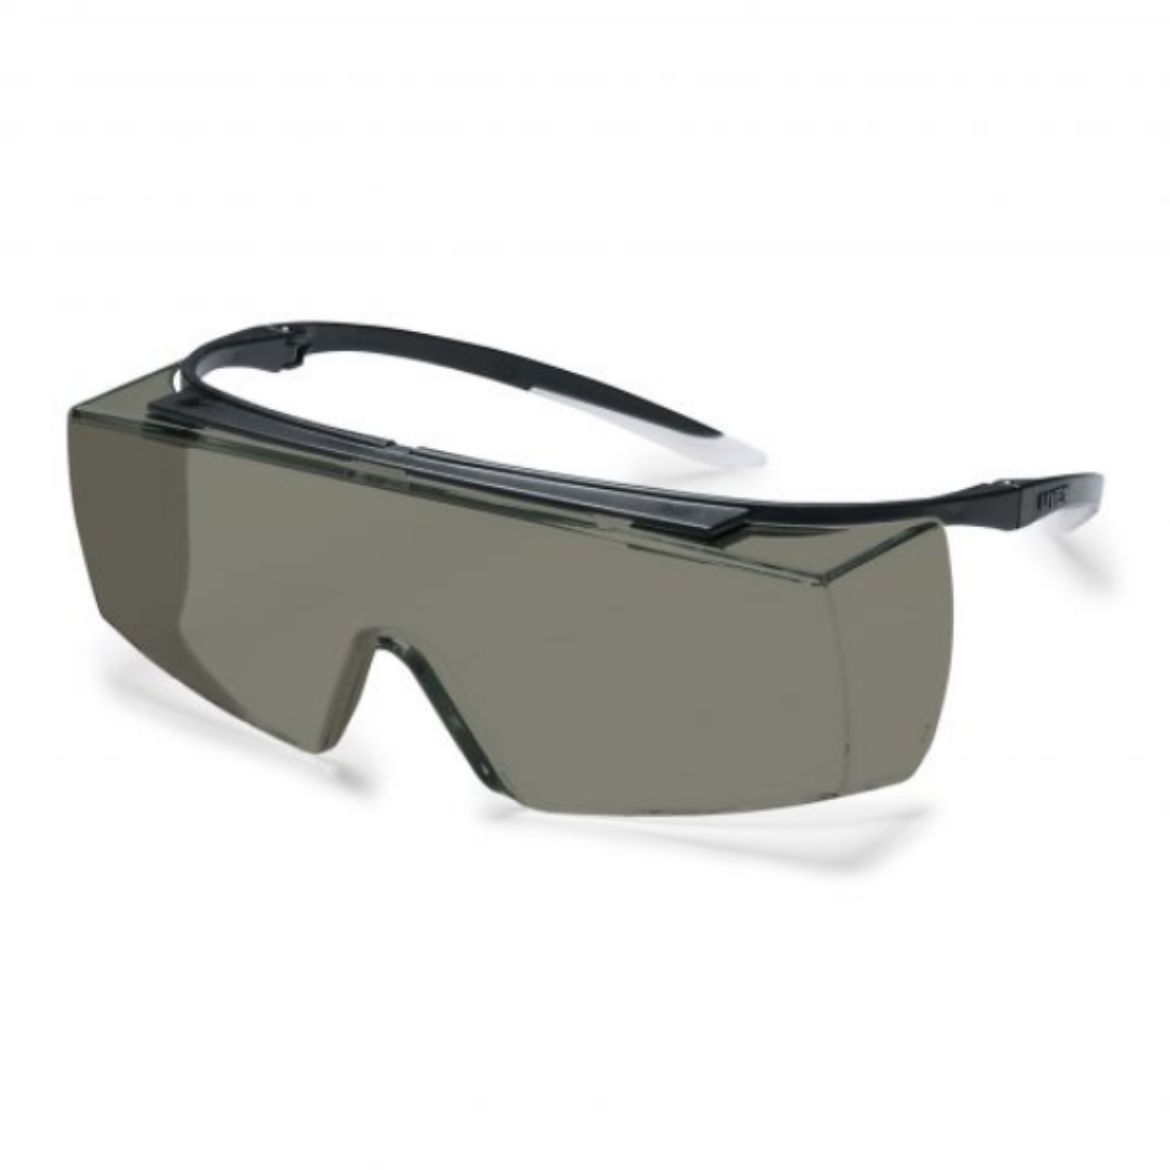 Picture of 9169-946 - GREY 20% + VLT CAT 2, UVEX SV SAPPHIRE LENS, BLACK FRAME WITH CLEAR TIPS